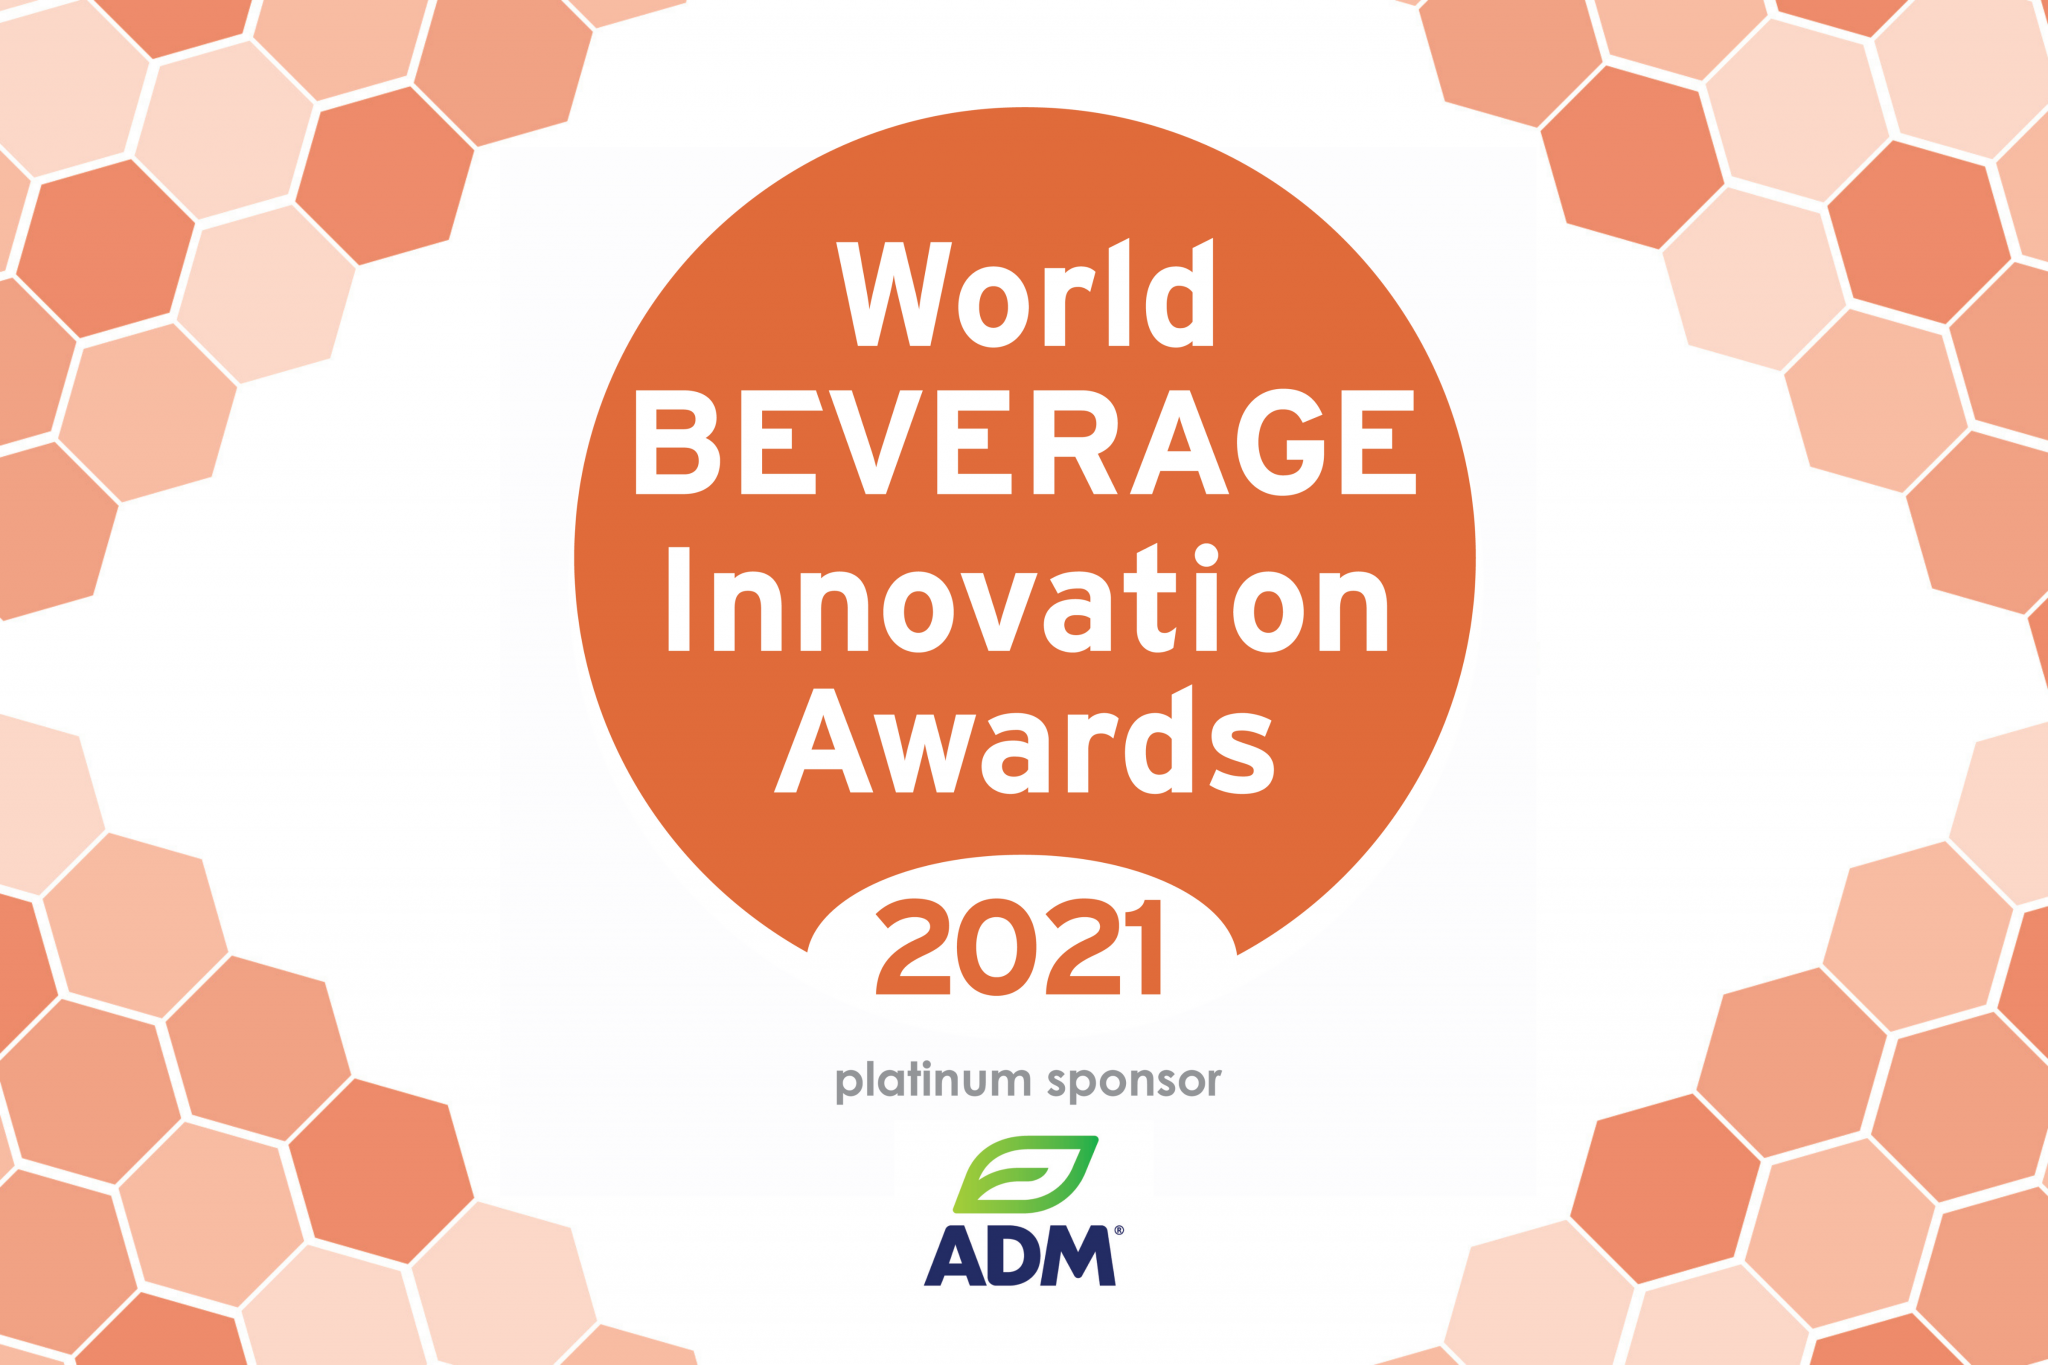 World Beverage Innovation Awards 2021: Finalists announced